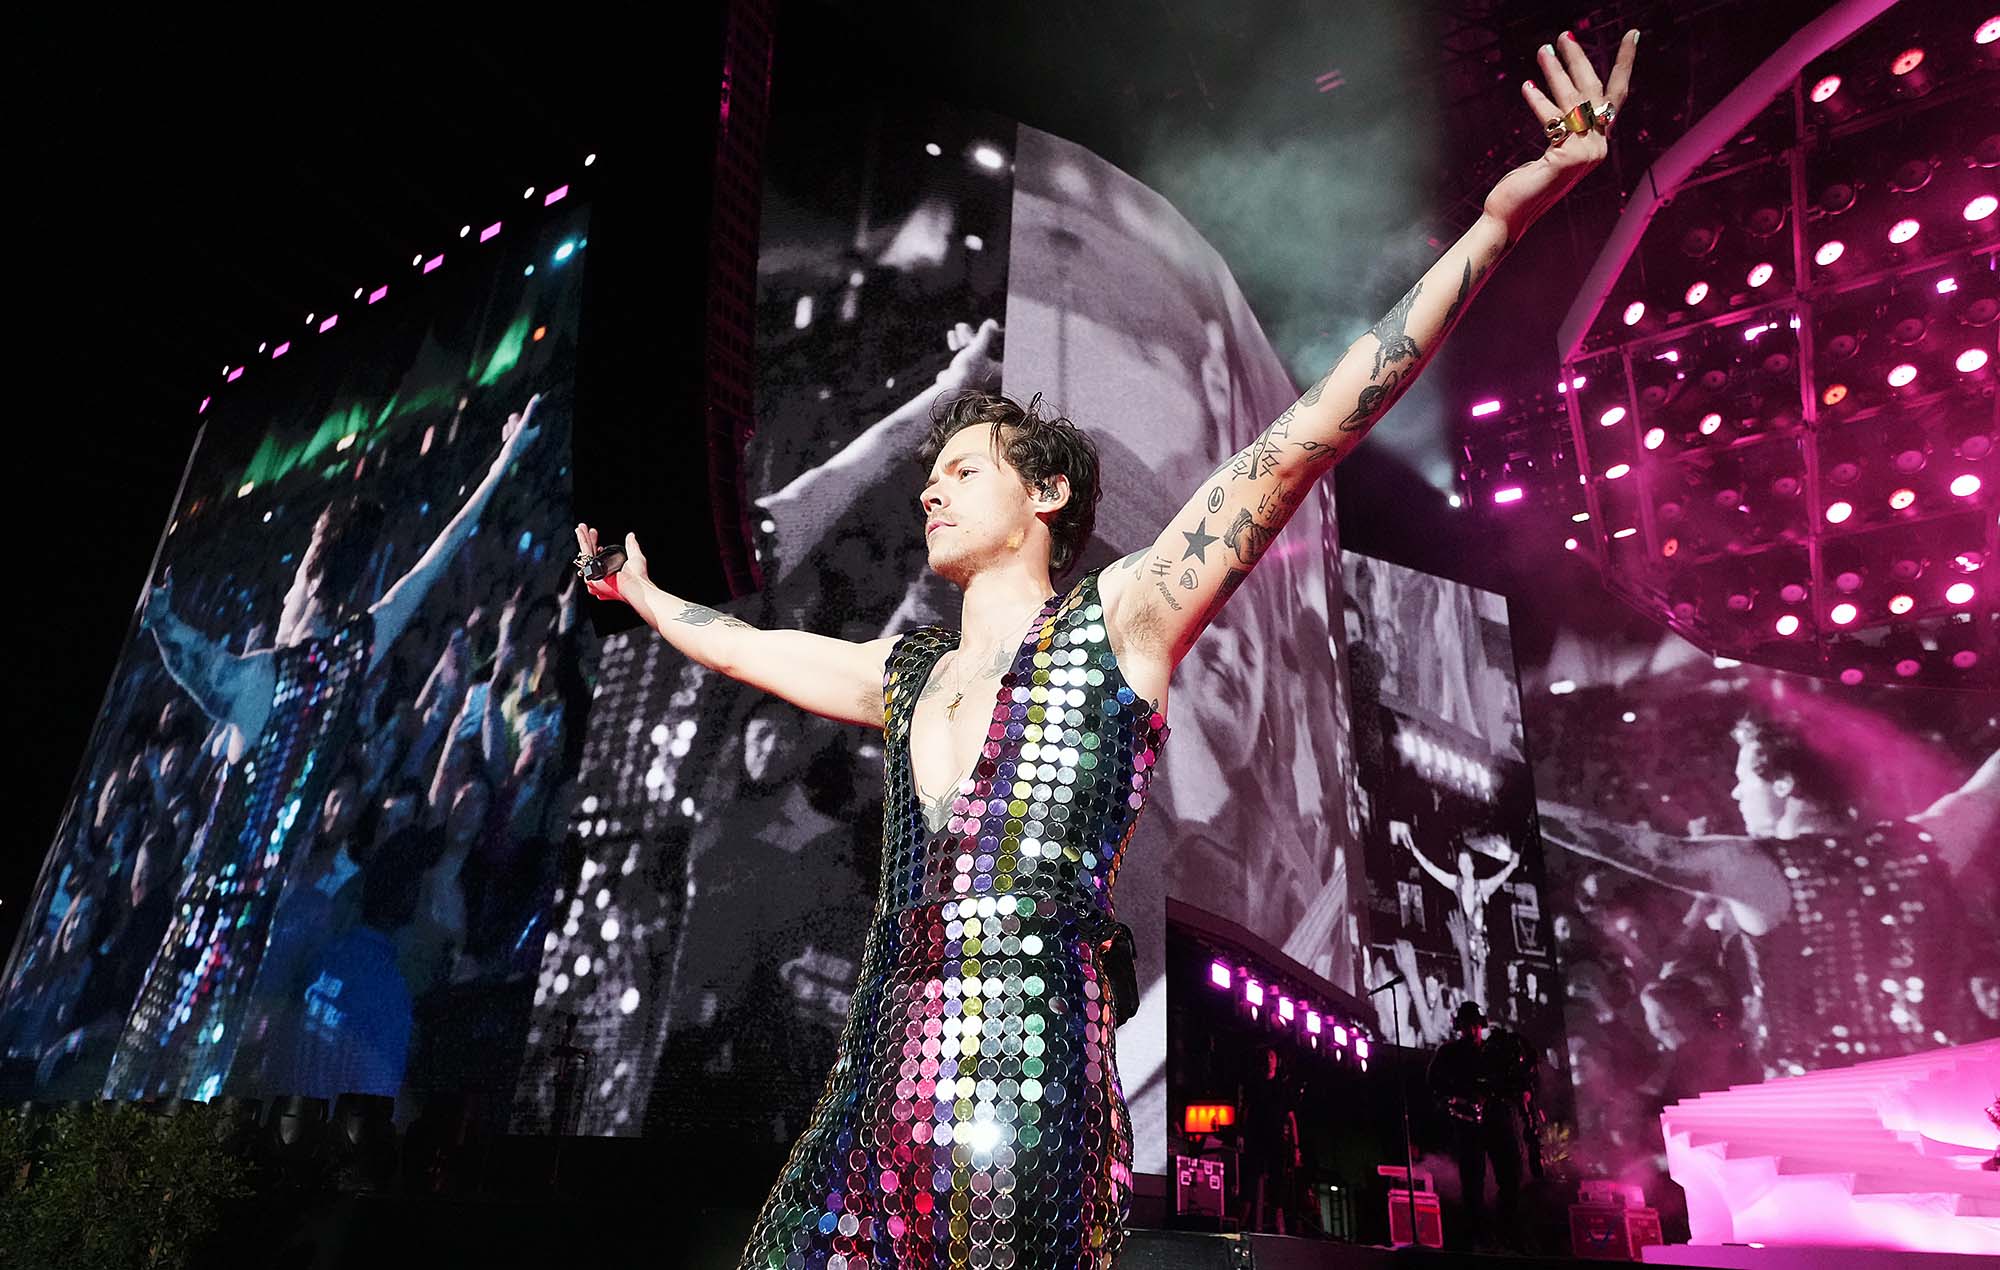 Harry Styles, the undisputed star of Coachella's opening weekend